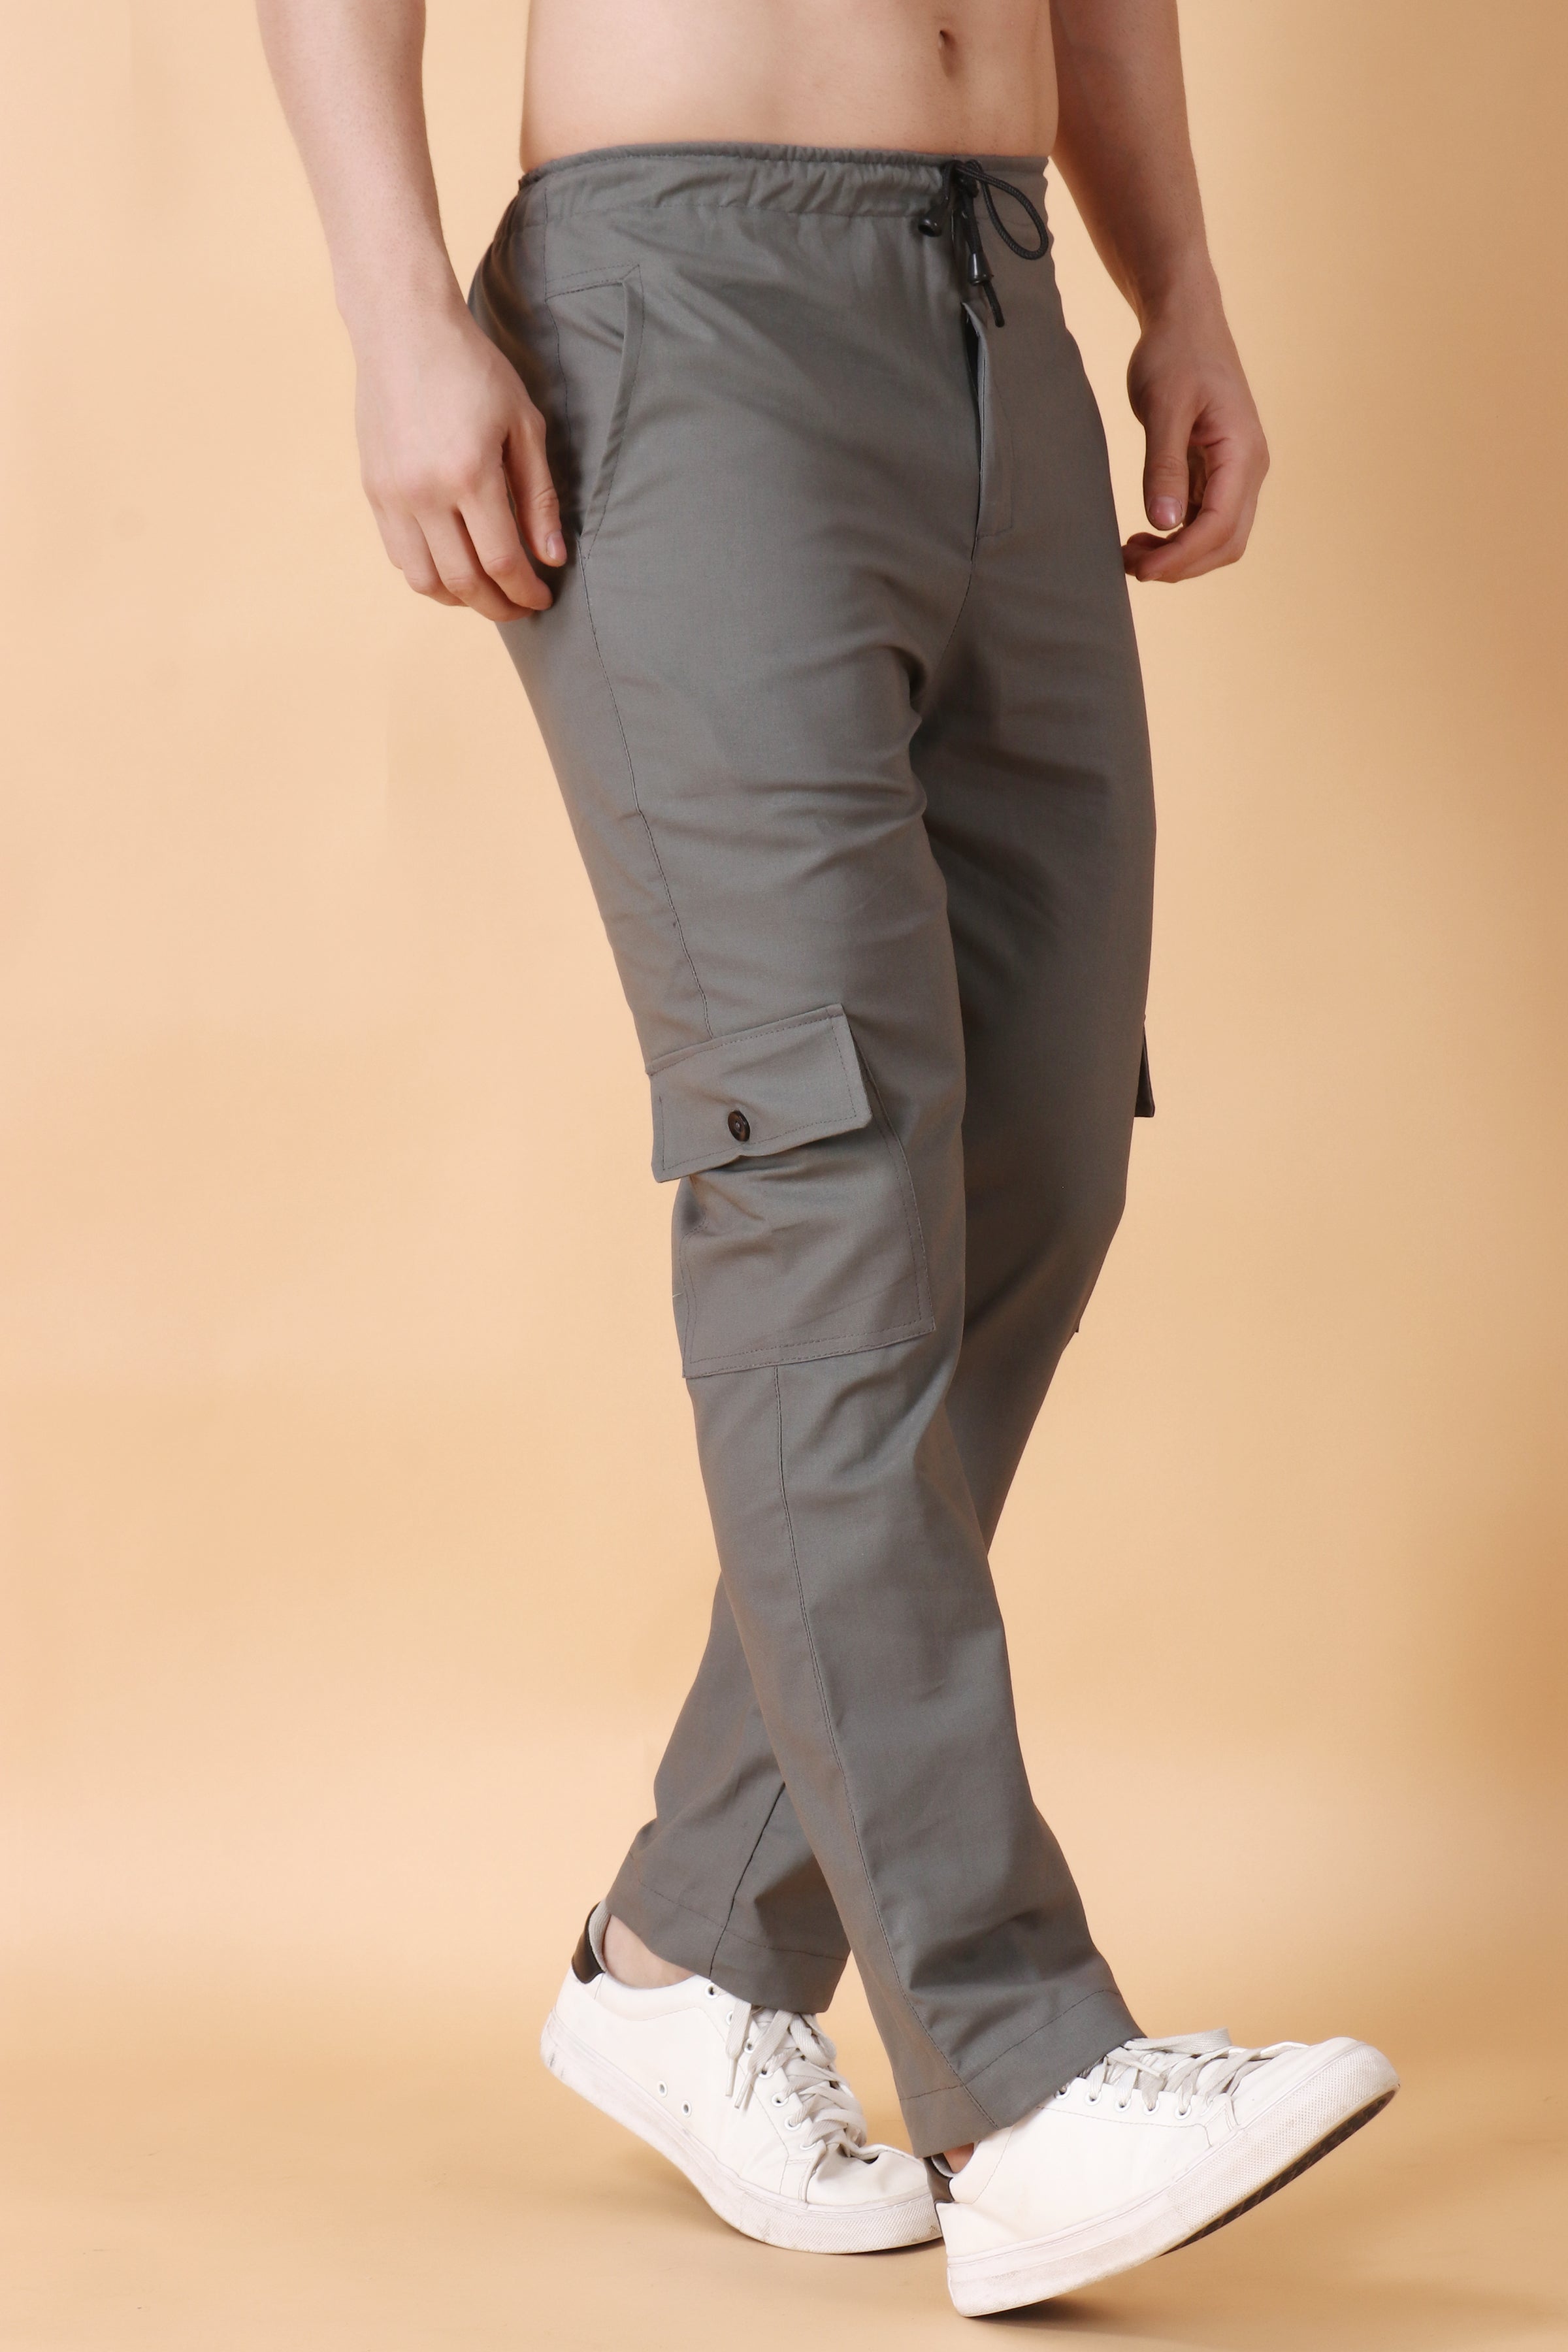 Strap and Stash Multi Pocket Cargo Pant – Offduty India